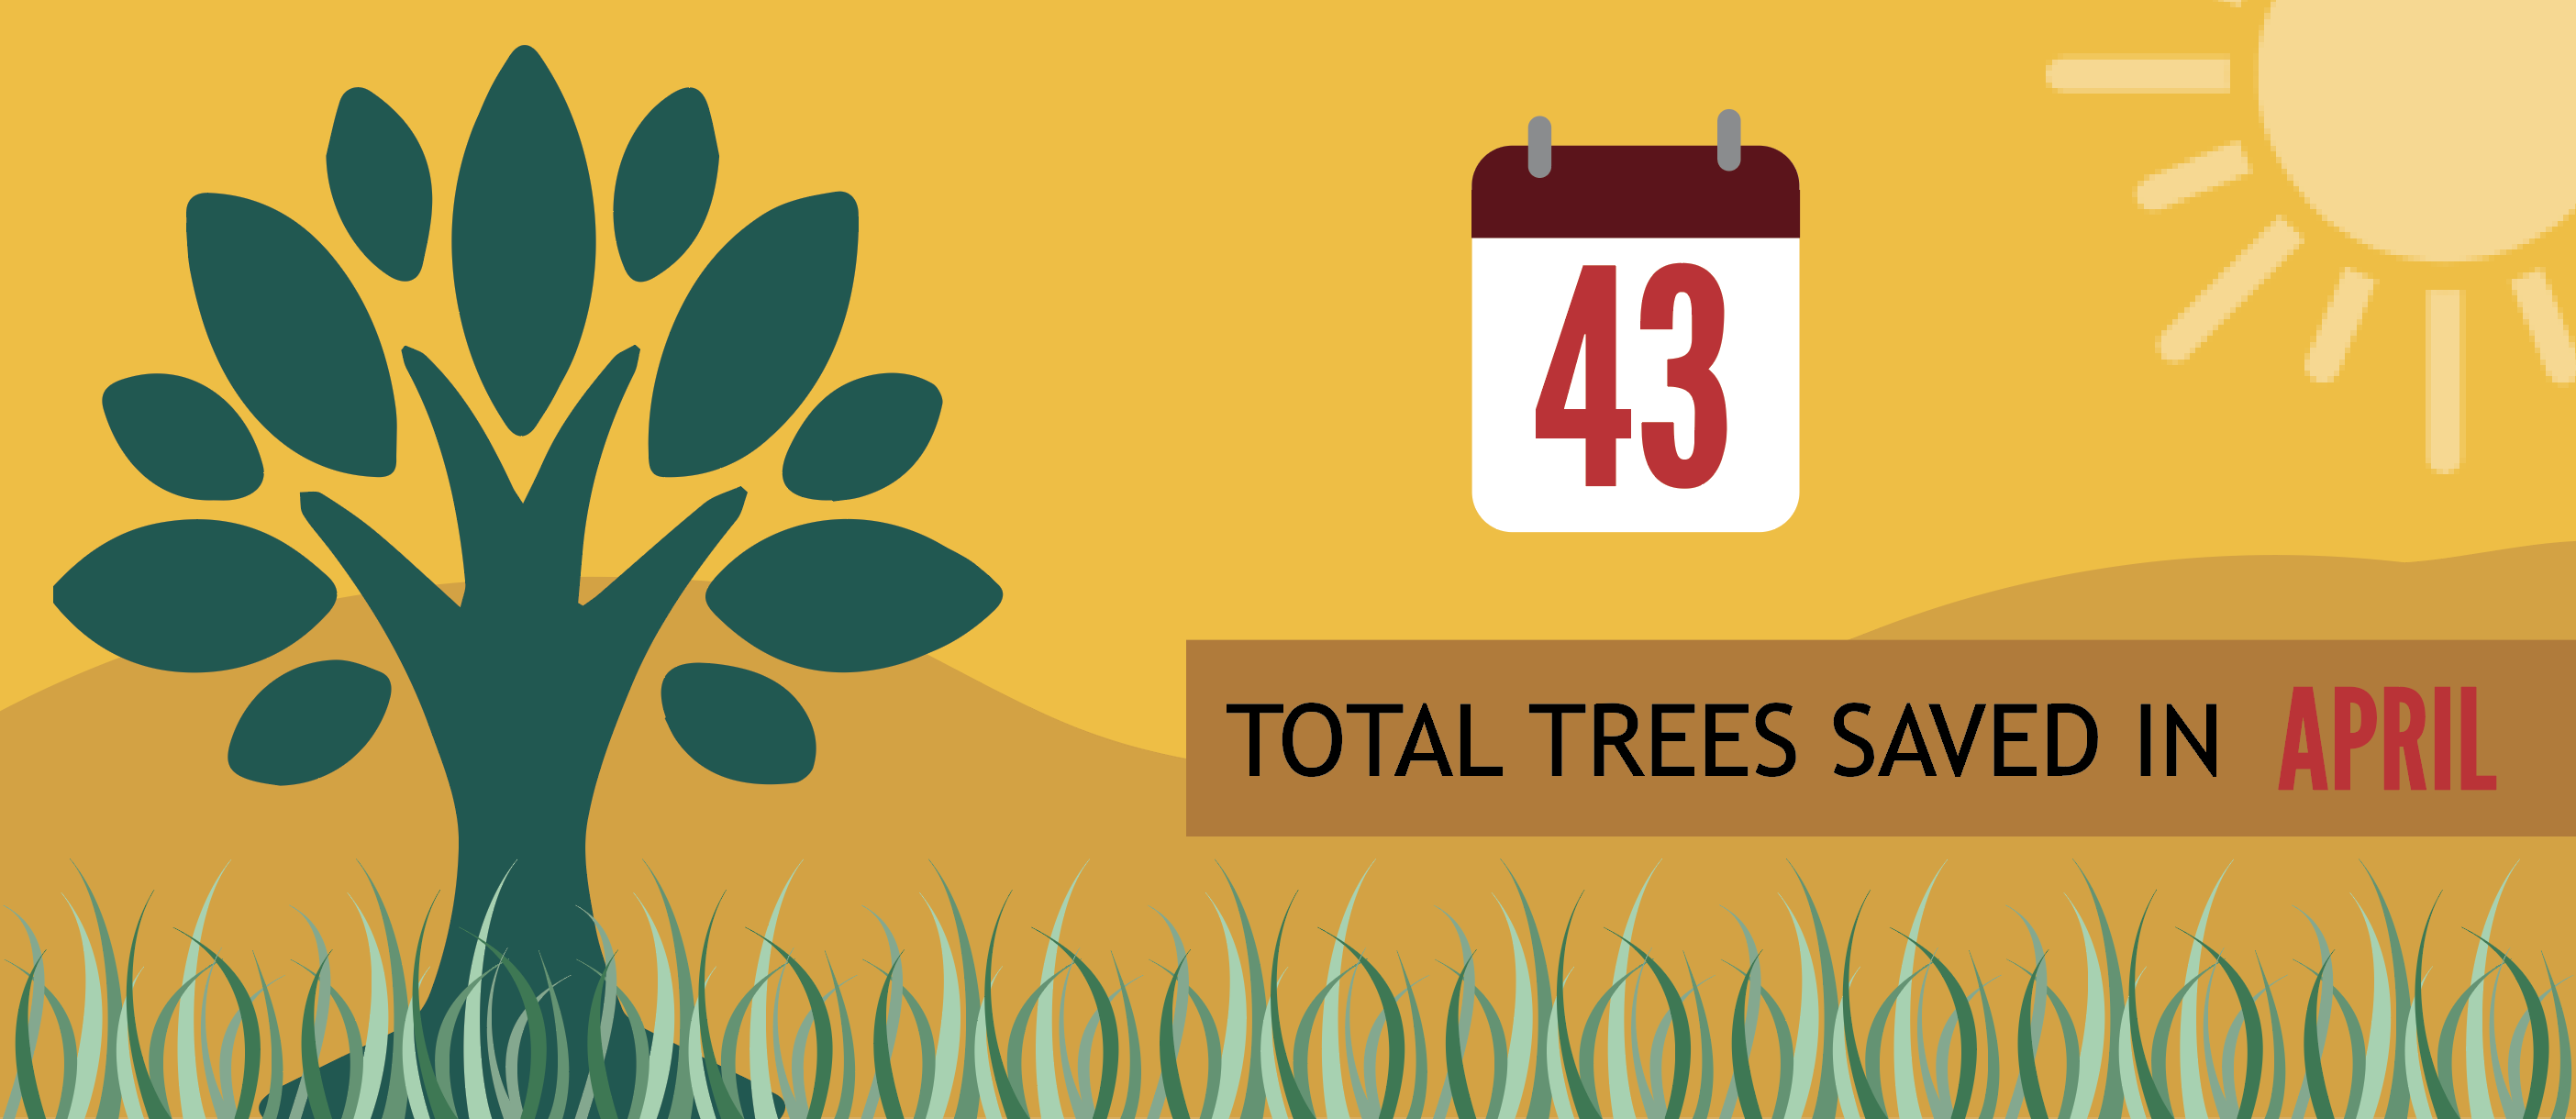 april-22-trees-saved-banner.png